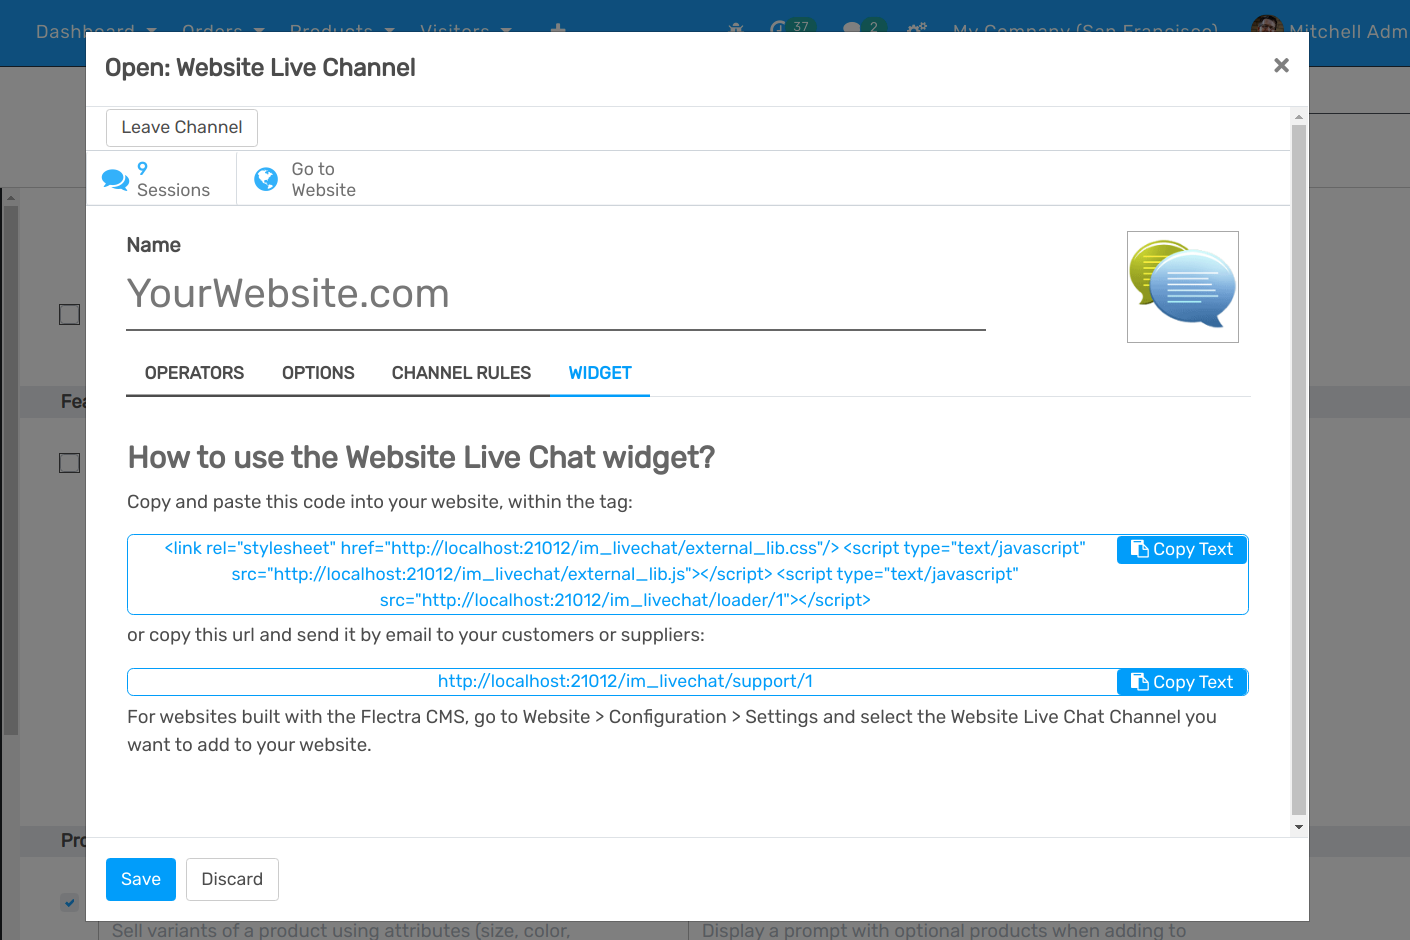 View of the widget tab for Flectra Live Chat